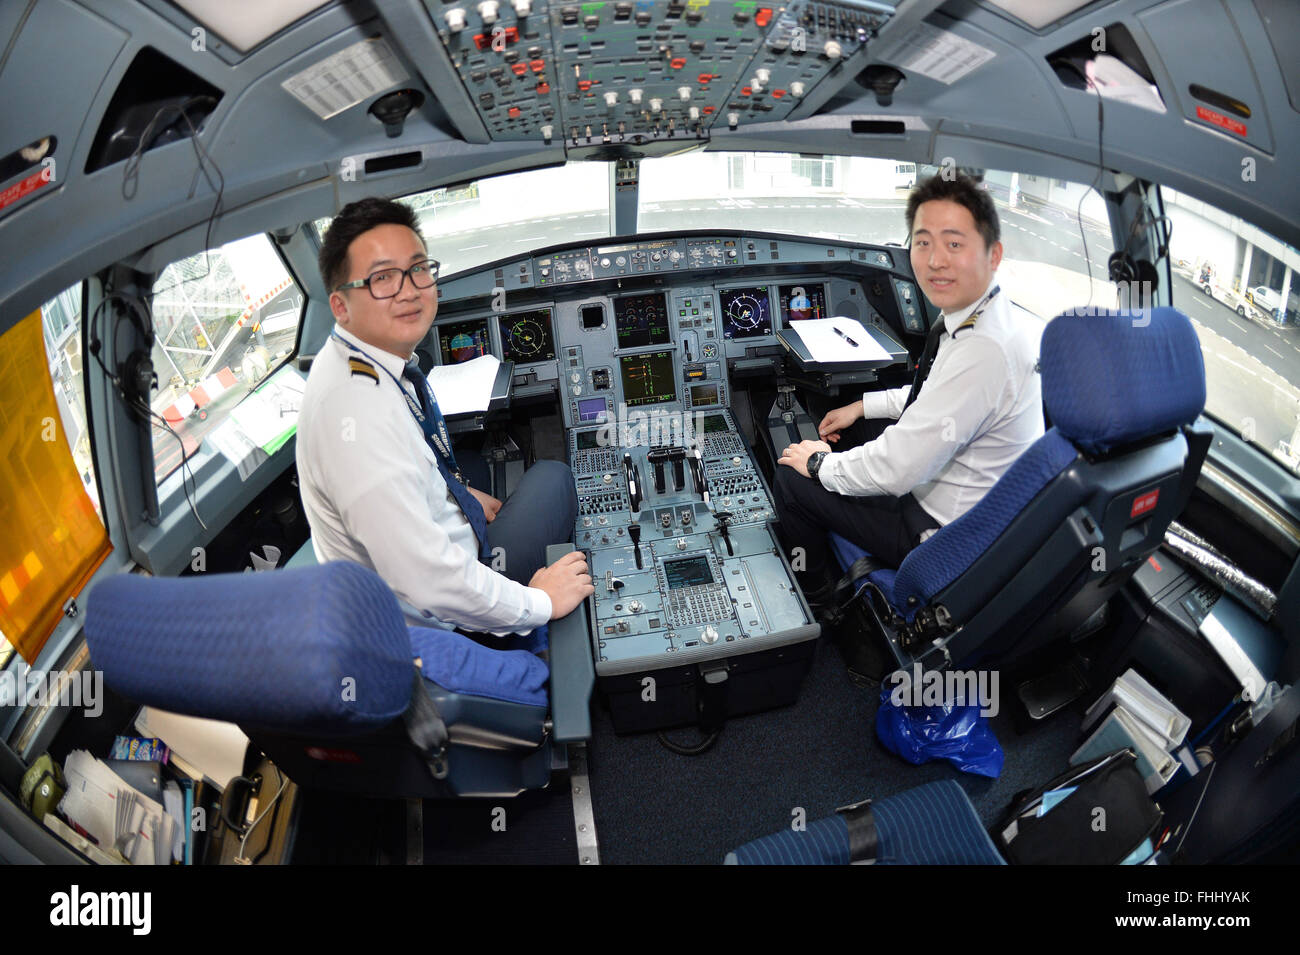 Prague, Czech Republic. 25th Feb, 2016. Ceremonial start of direct flights between Chengdu in China and Prague took place at the Vaclav Havel Airport in Prague, Czech Republic, February 25, 2016. Pictured from left: captain Ji Dong Ye and first officer Xu Rui in the cockpit of an Airbus A330-200. © Michal Dolezal/CTK Photo/Alamy Live News Stock Photo